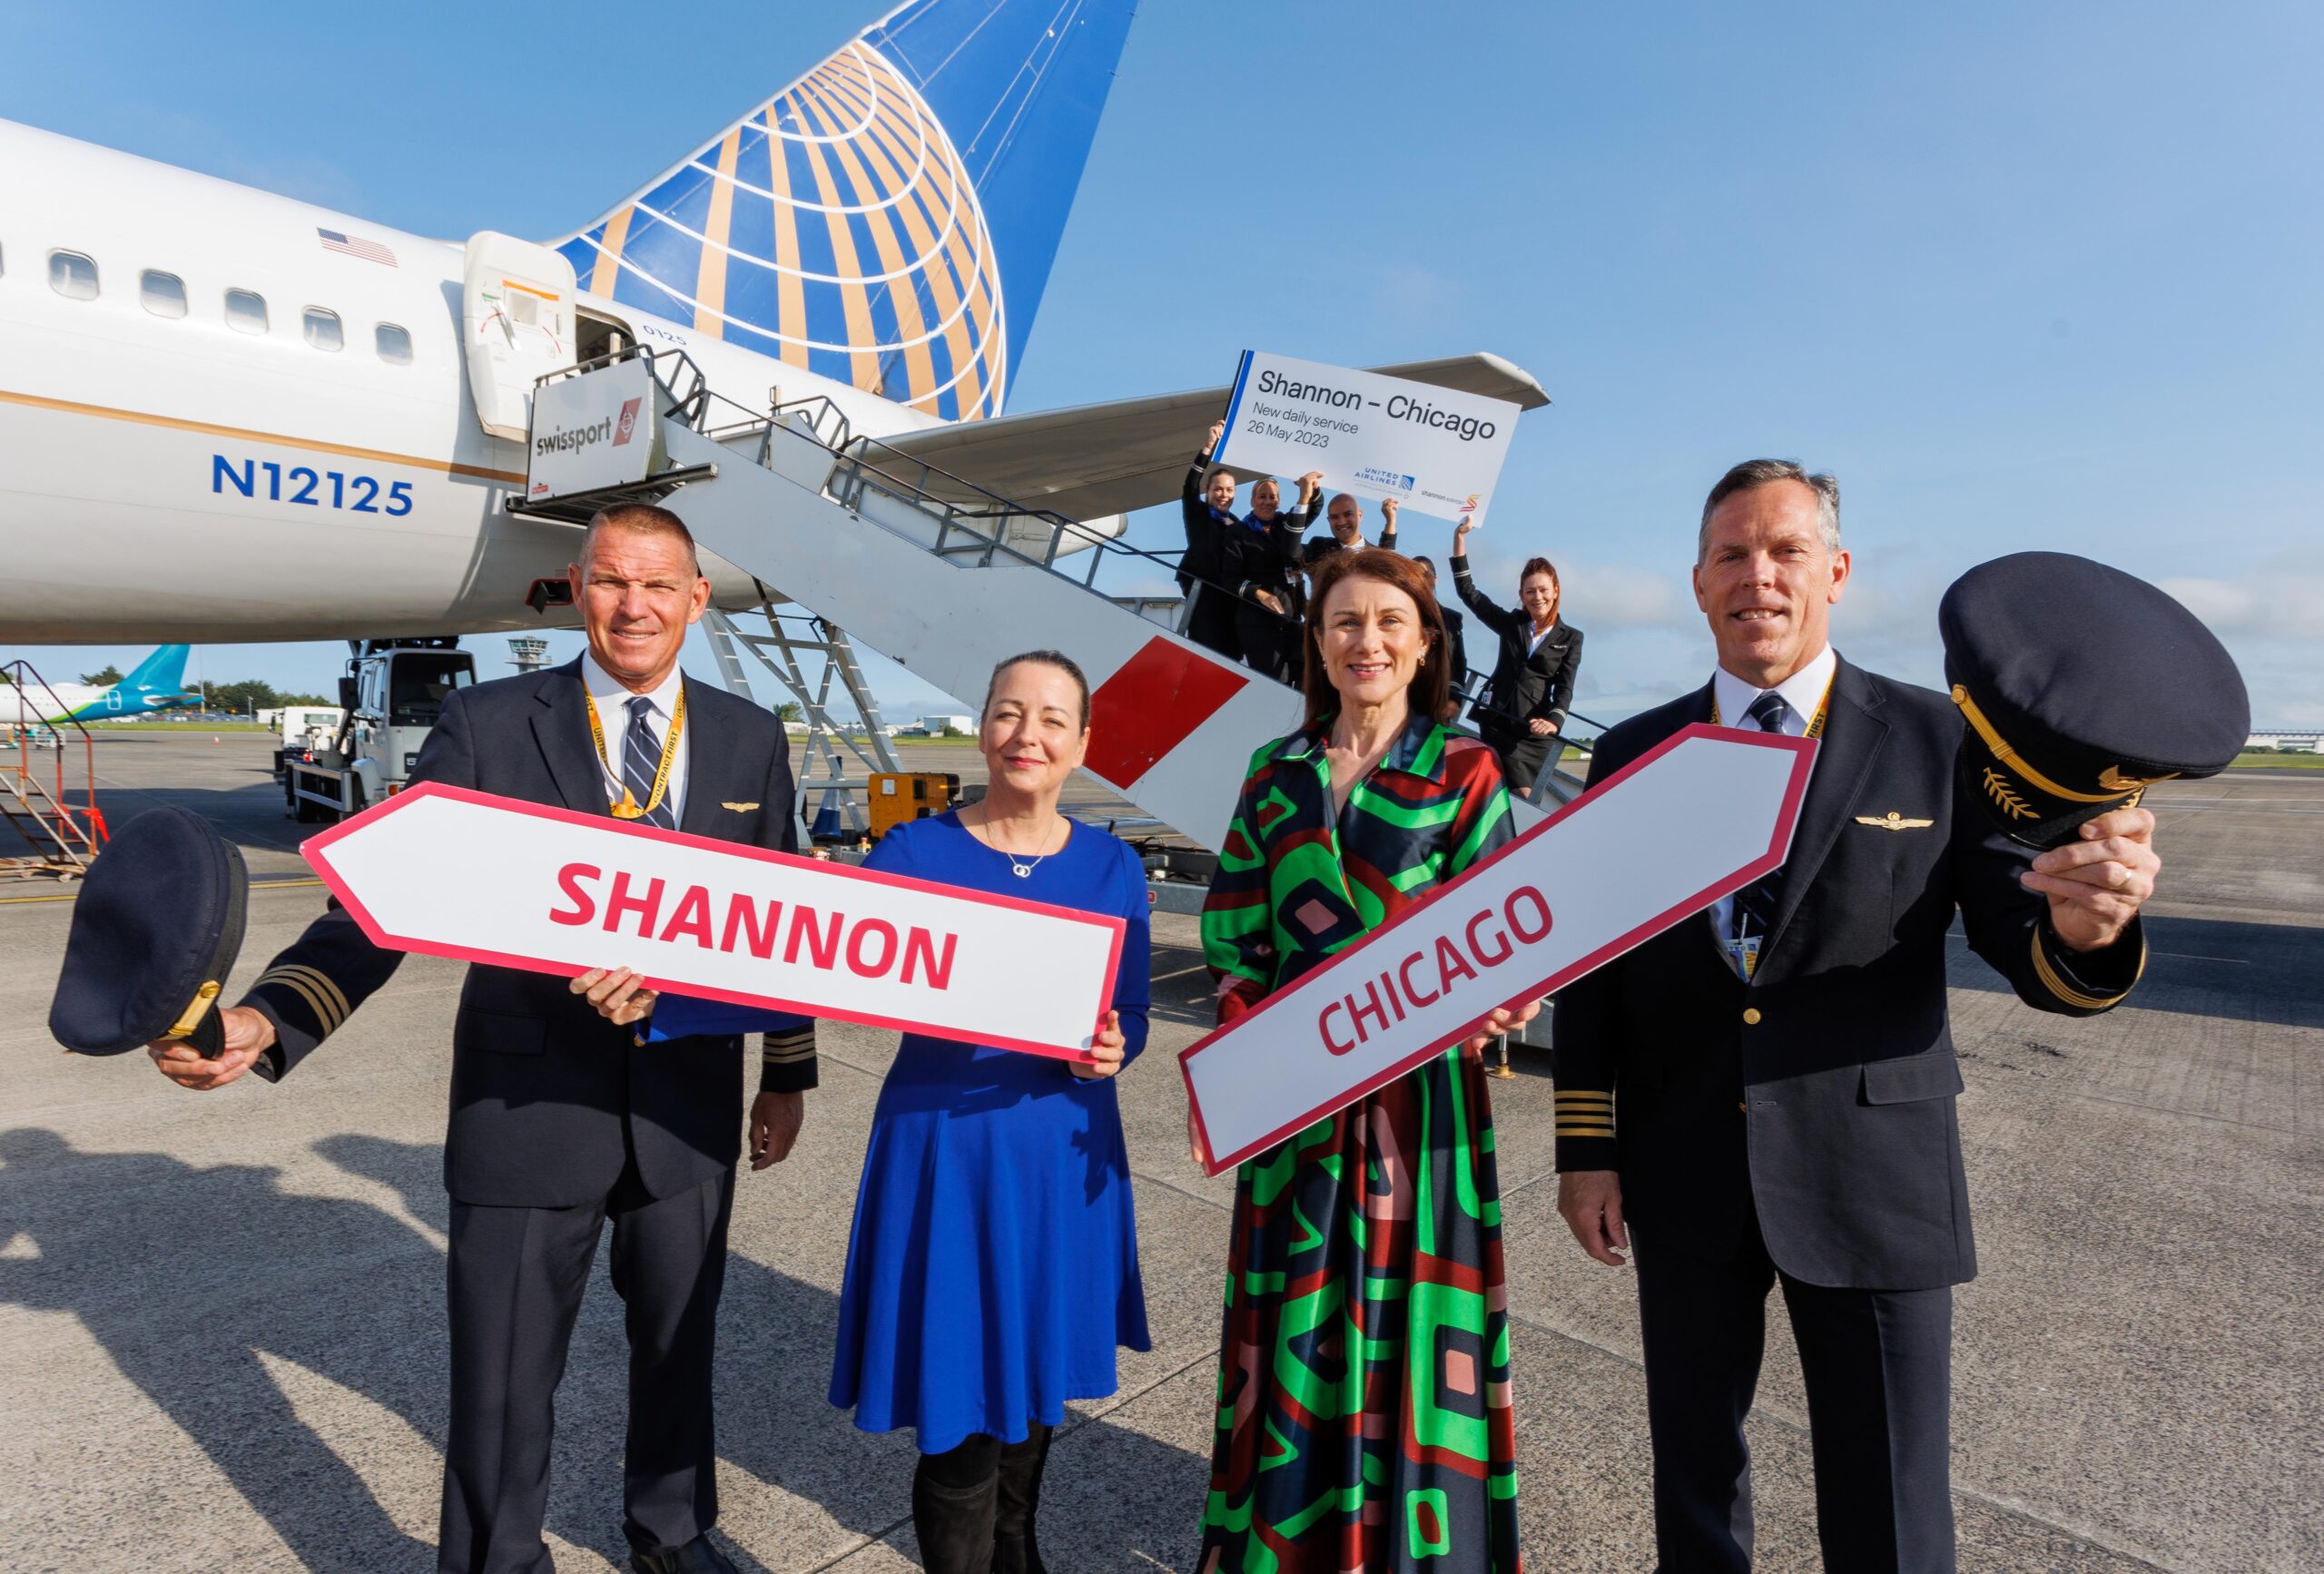 Shannon Airport’s new Chicago service takes off with United